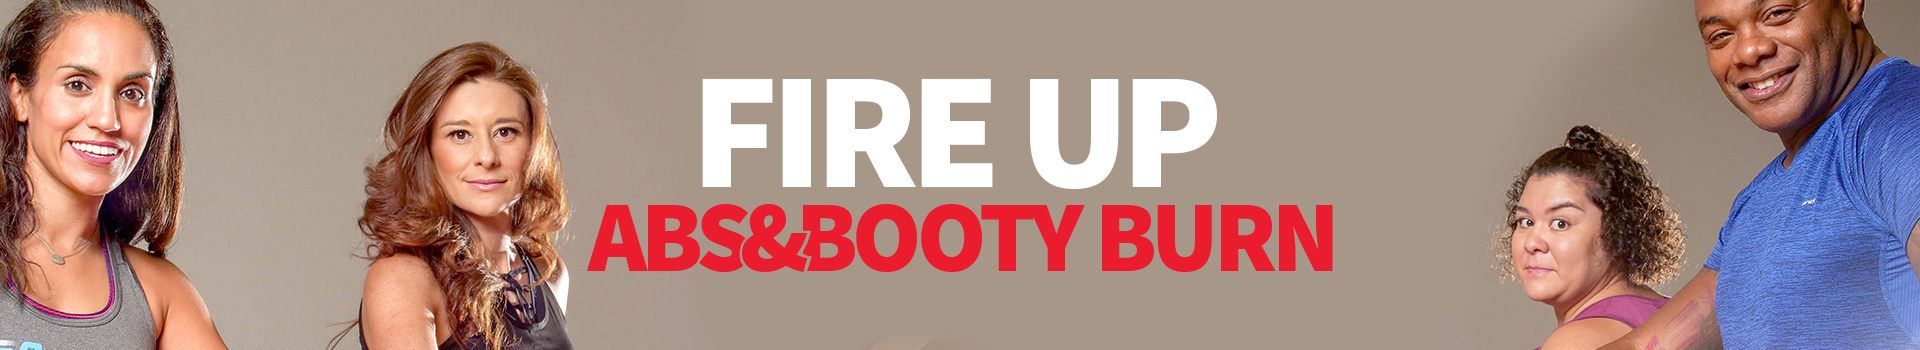 Fire Up Abs & Booty Burn